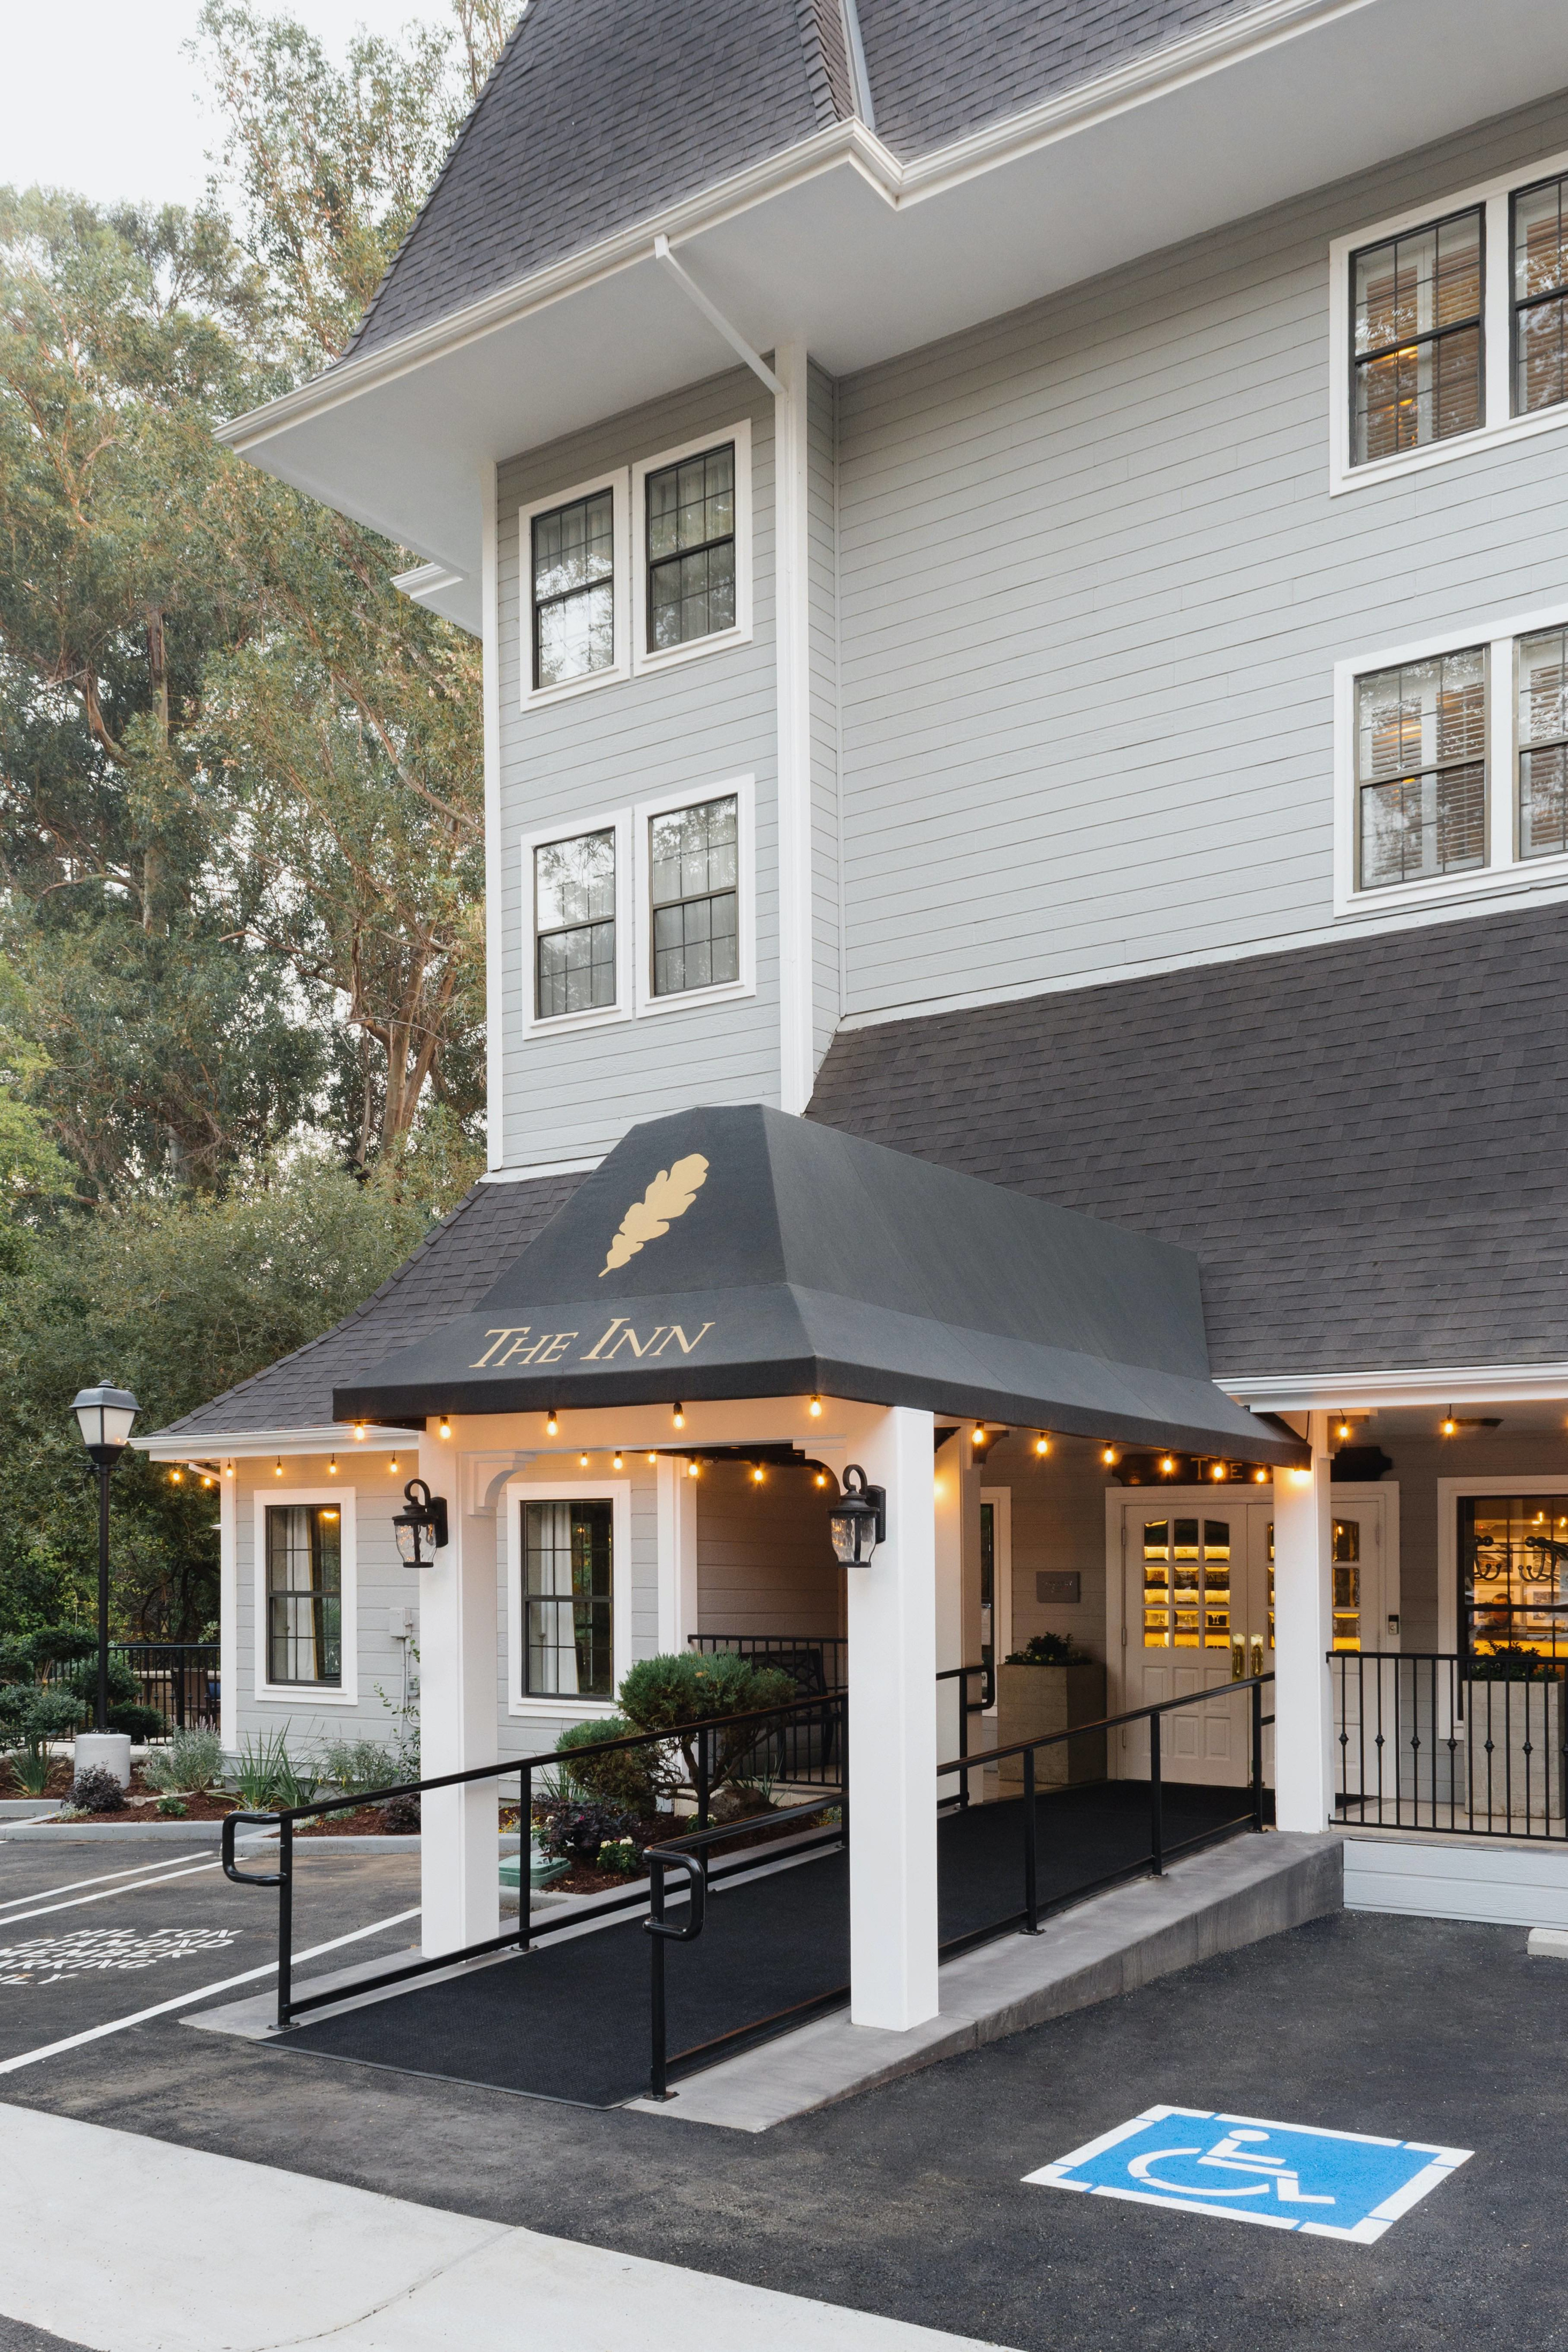 The Inn at Saratoga Tapestry Hotel Entrance